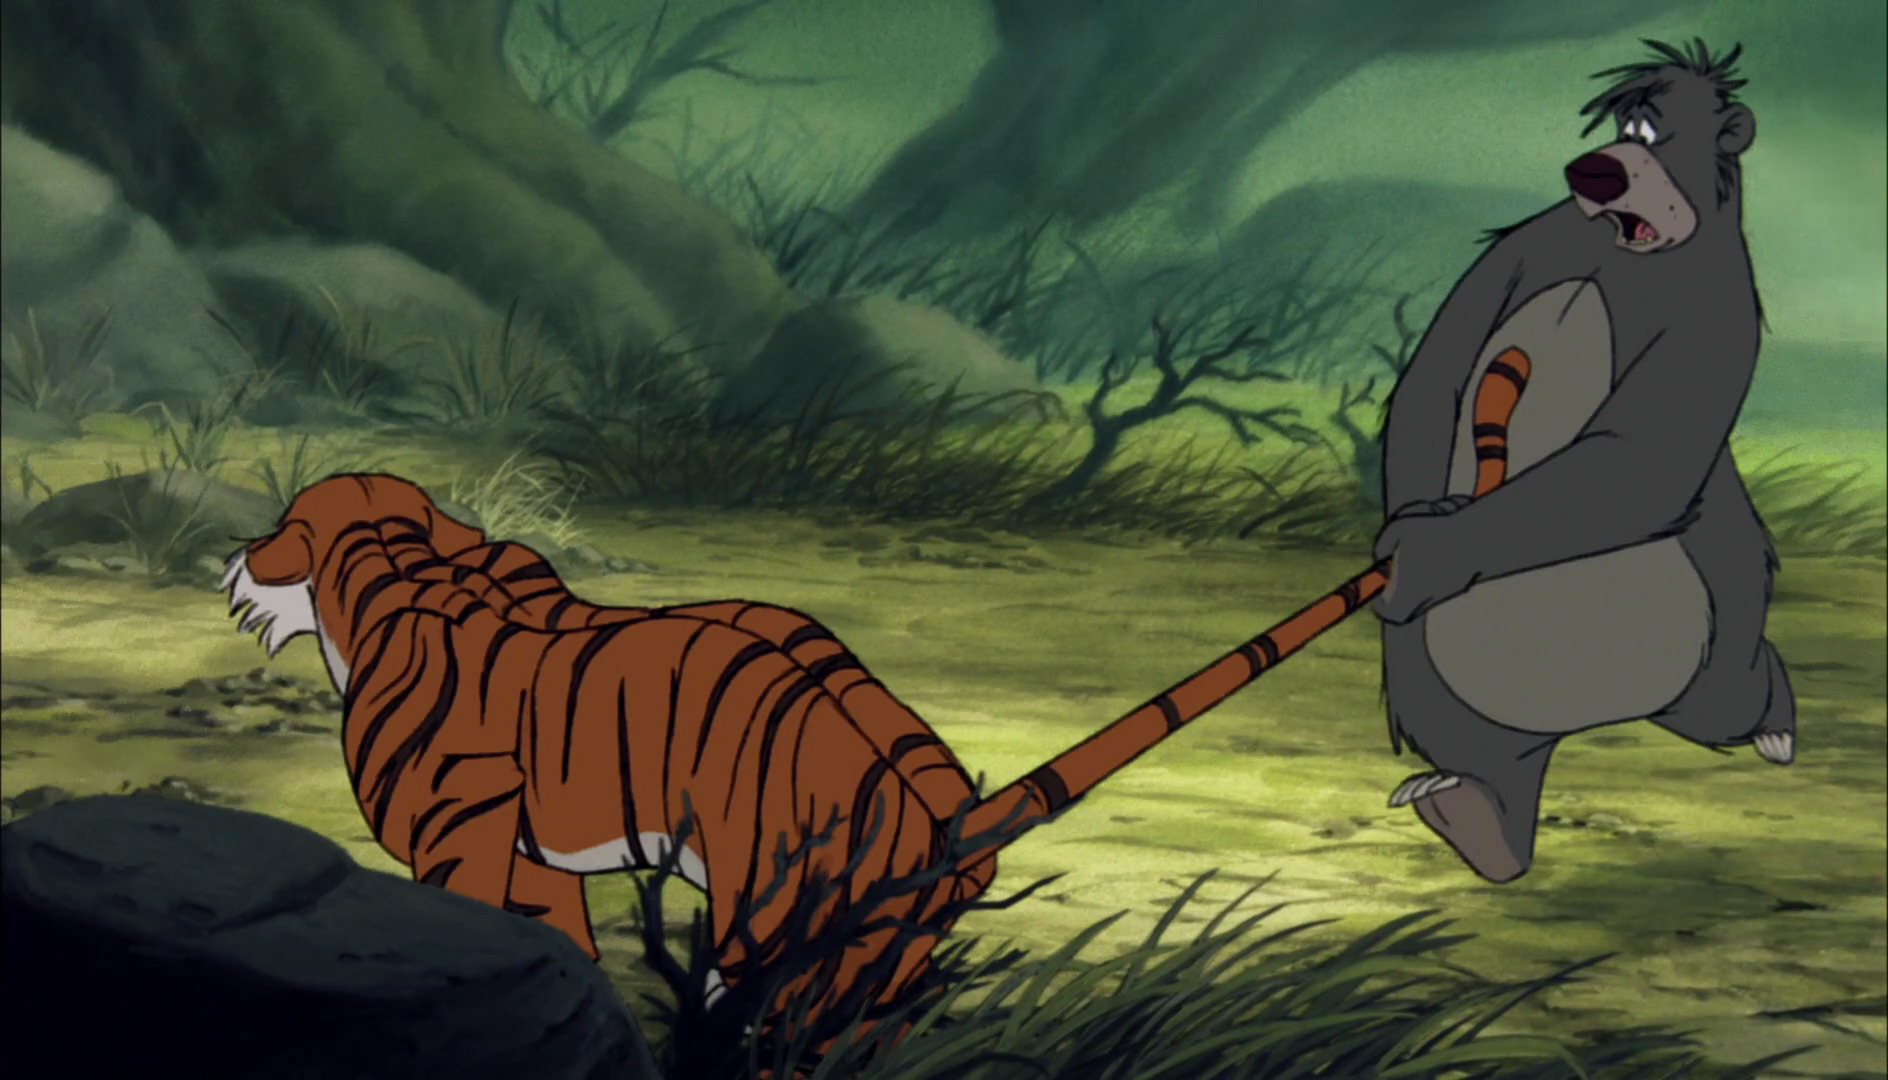 Baloo the Bear is still grabing Shere Khan the tiger s tail